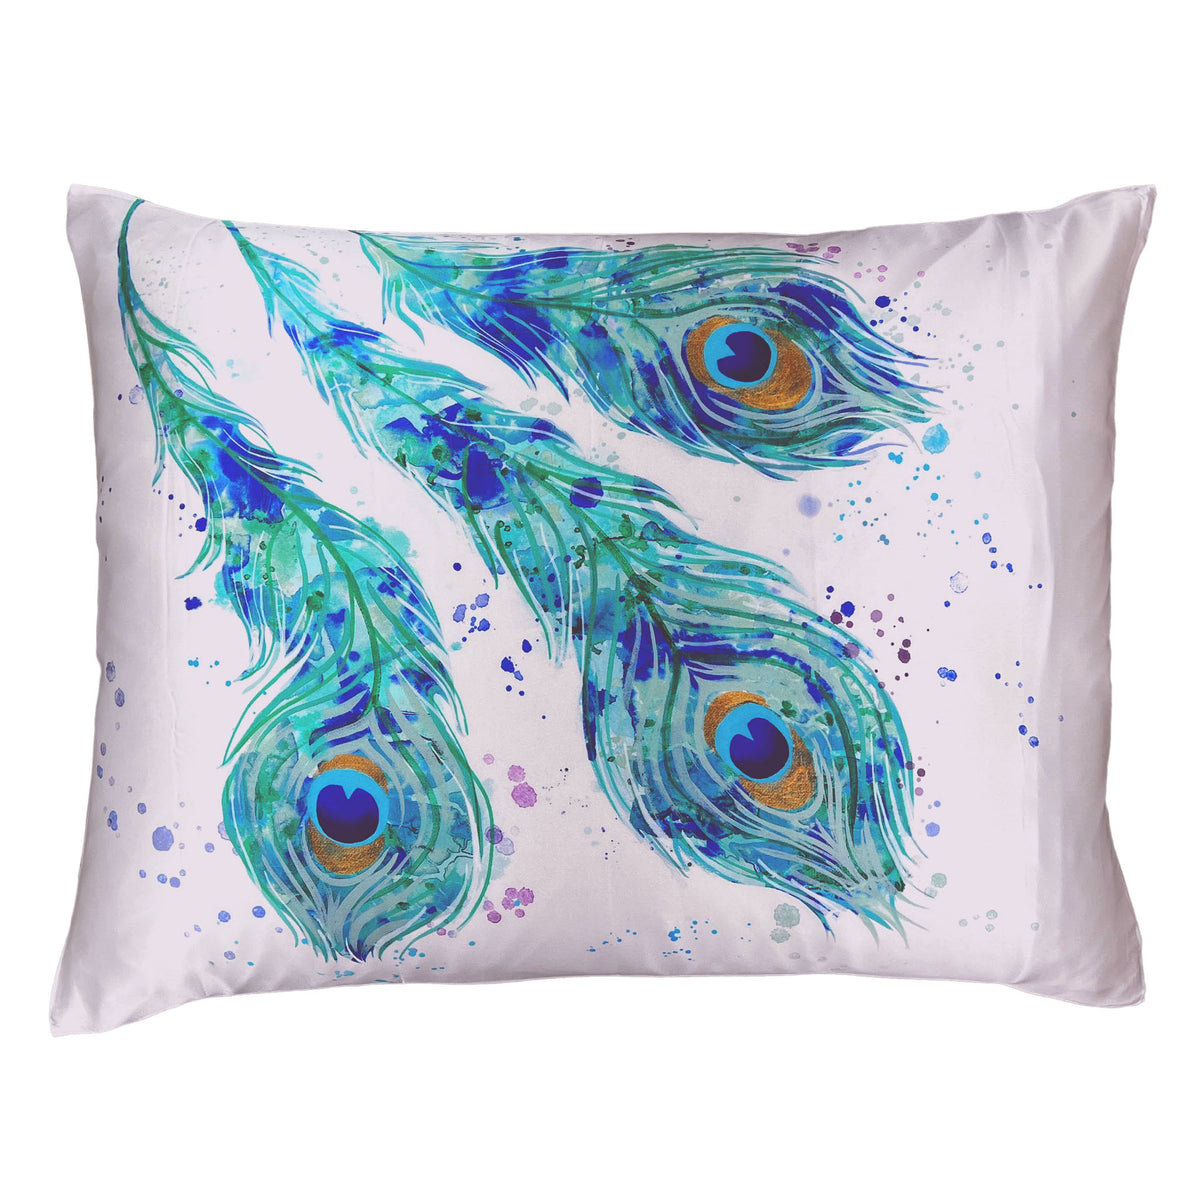 Gallery Collection Silk Pillowcase - Peacock Feathers